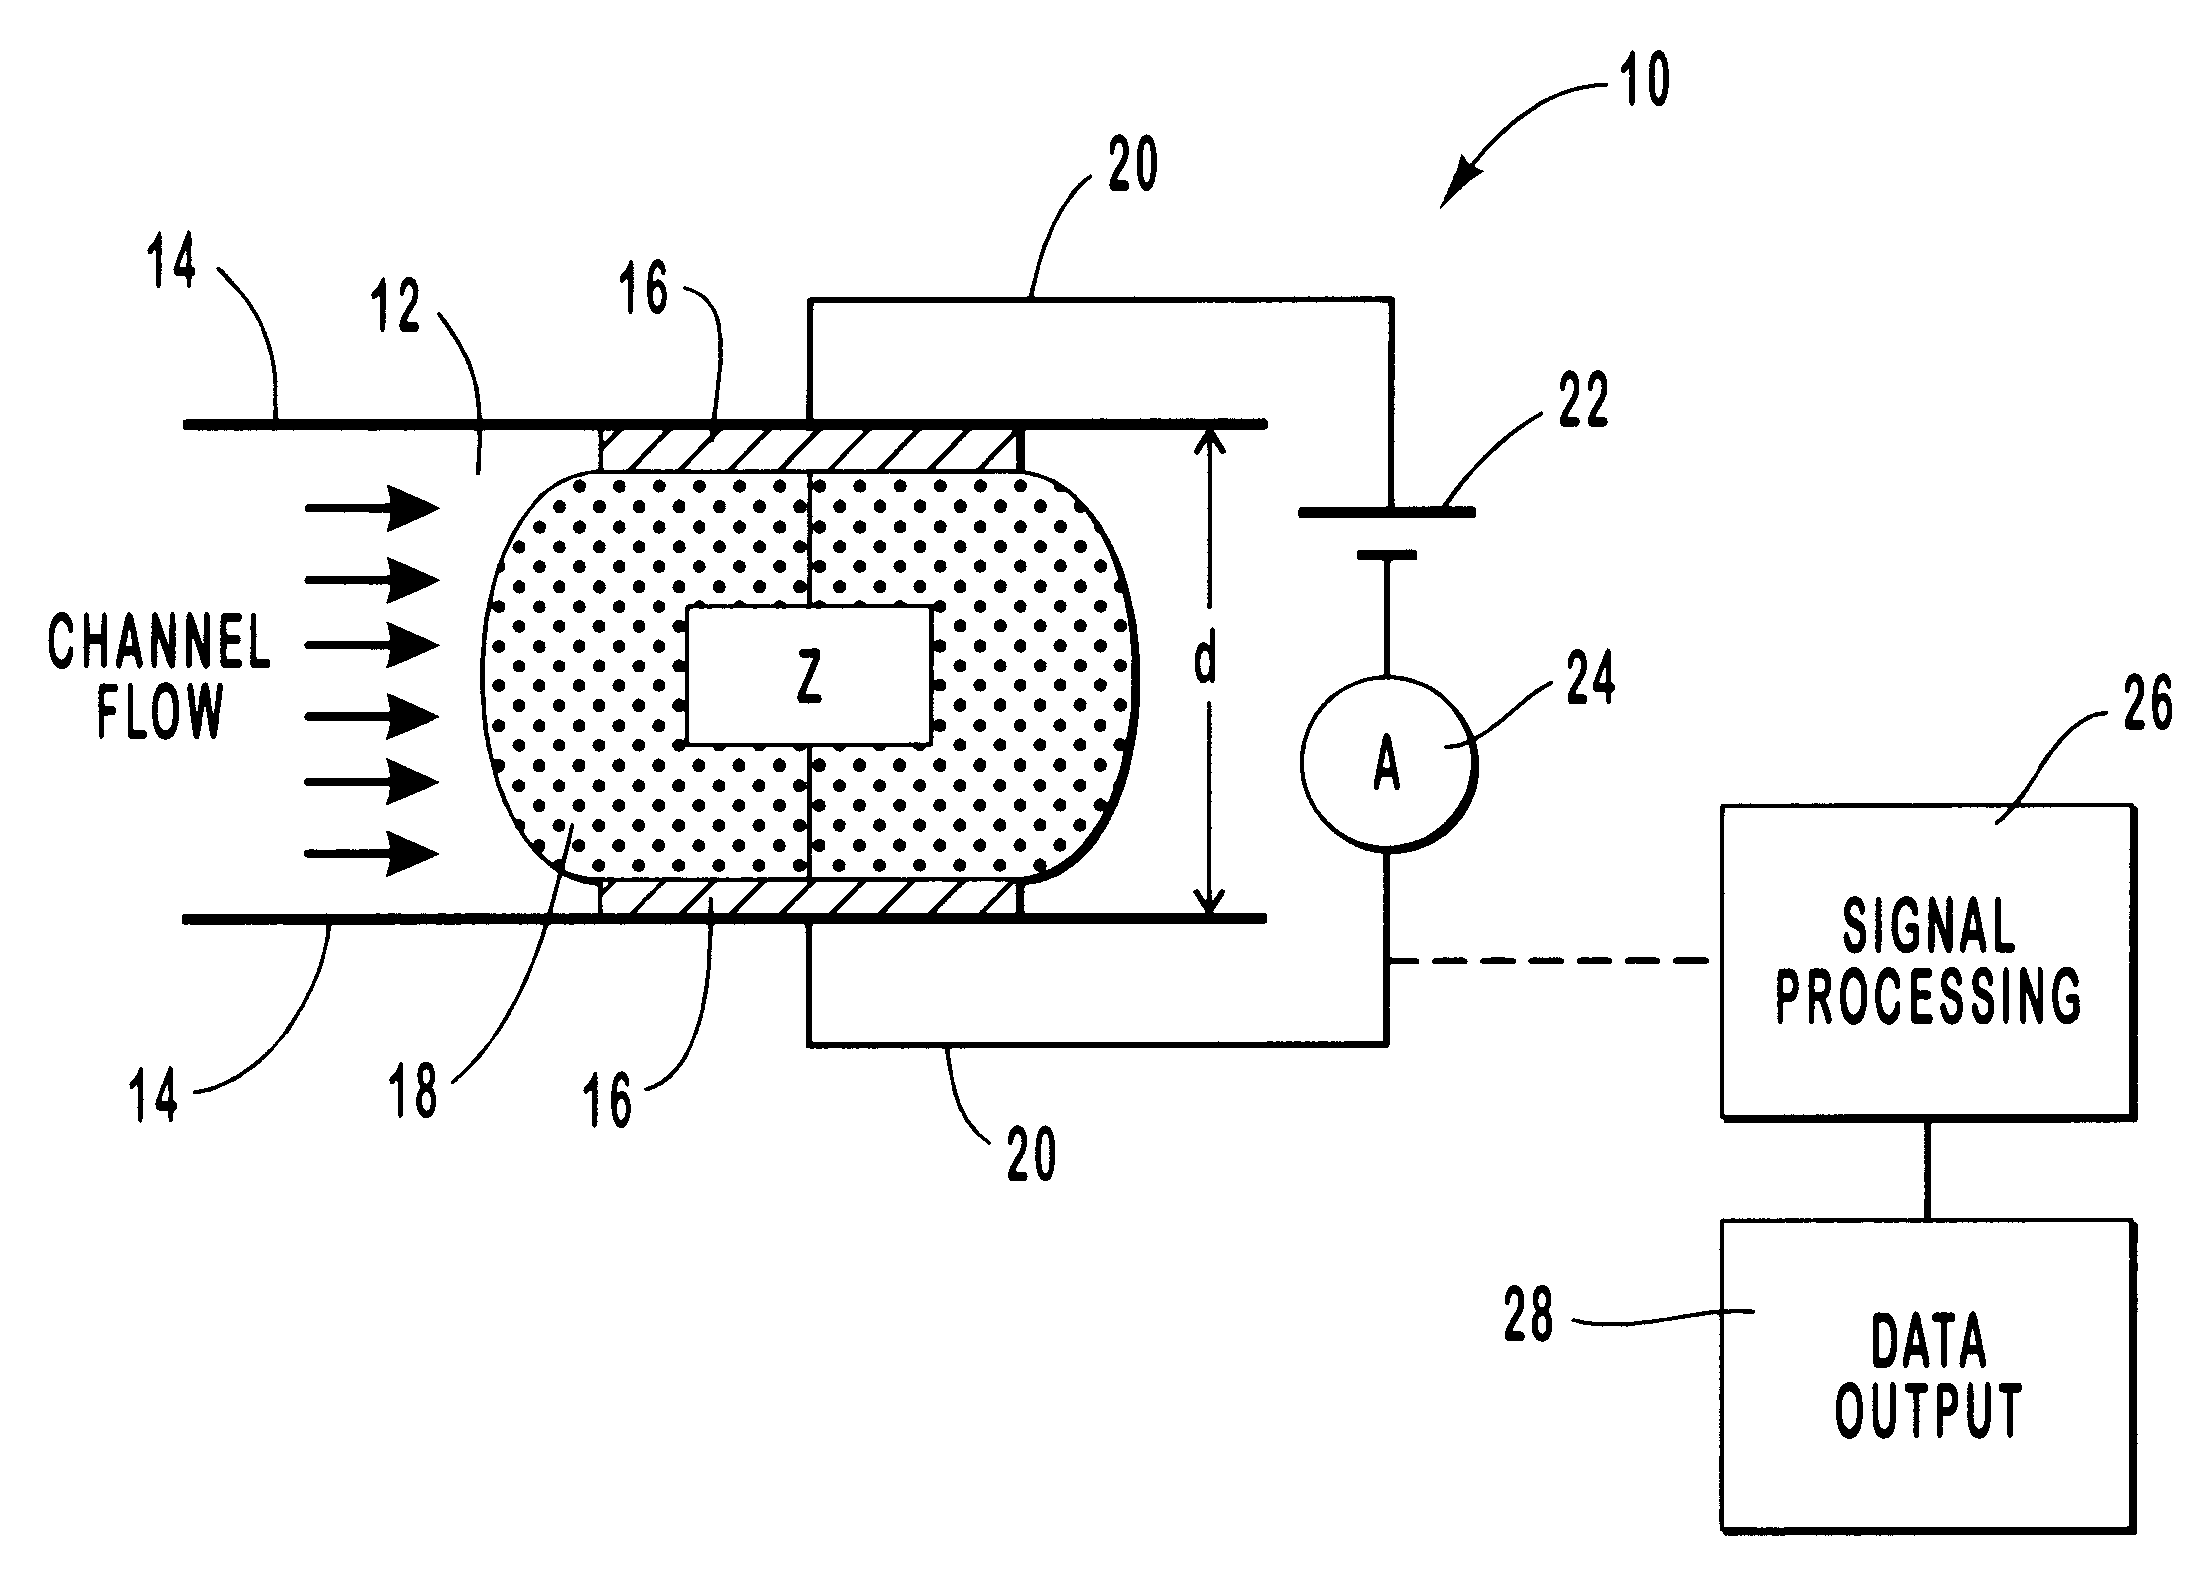 Electrical detector for micro-analysis systems